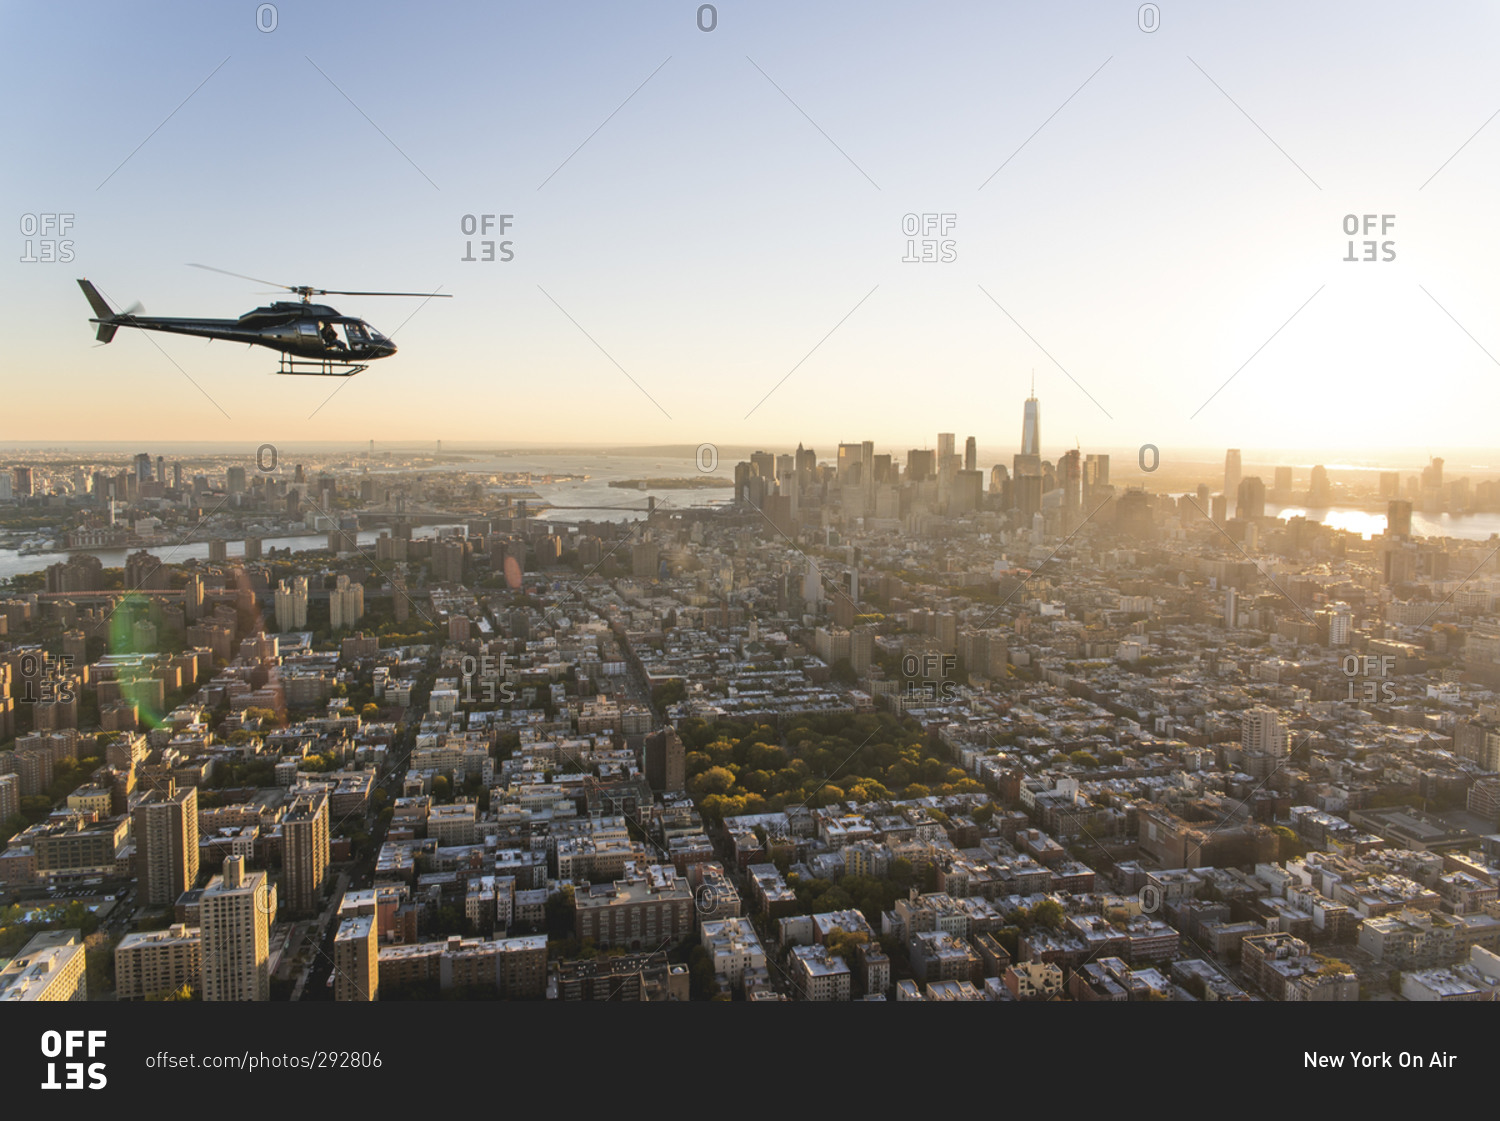 Helicopter flying over the island of Manhattan at sunset, New York City, NY